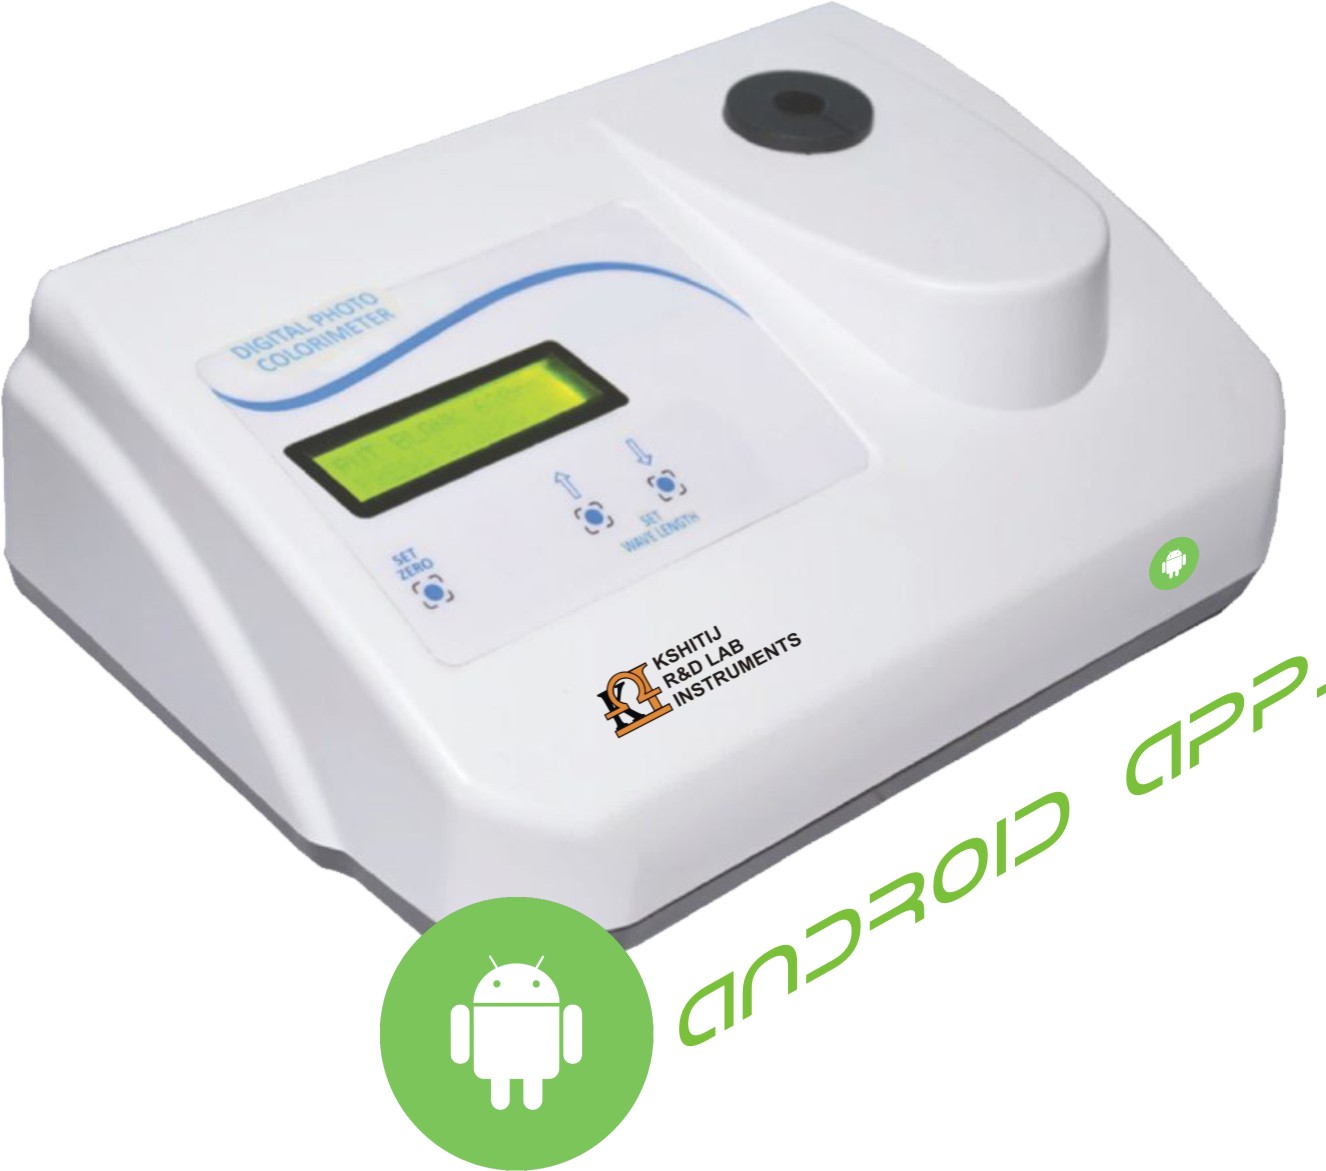 controller/assets/products_upload/Photocolorimeter ( Android Based), Model No.: KI - 102